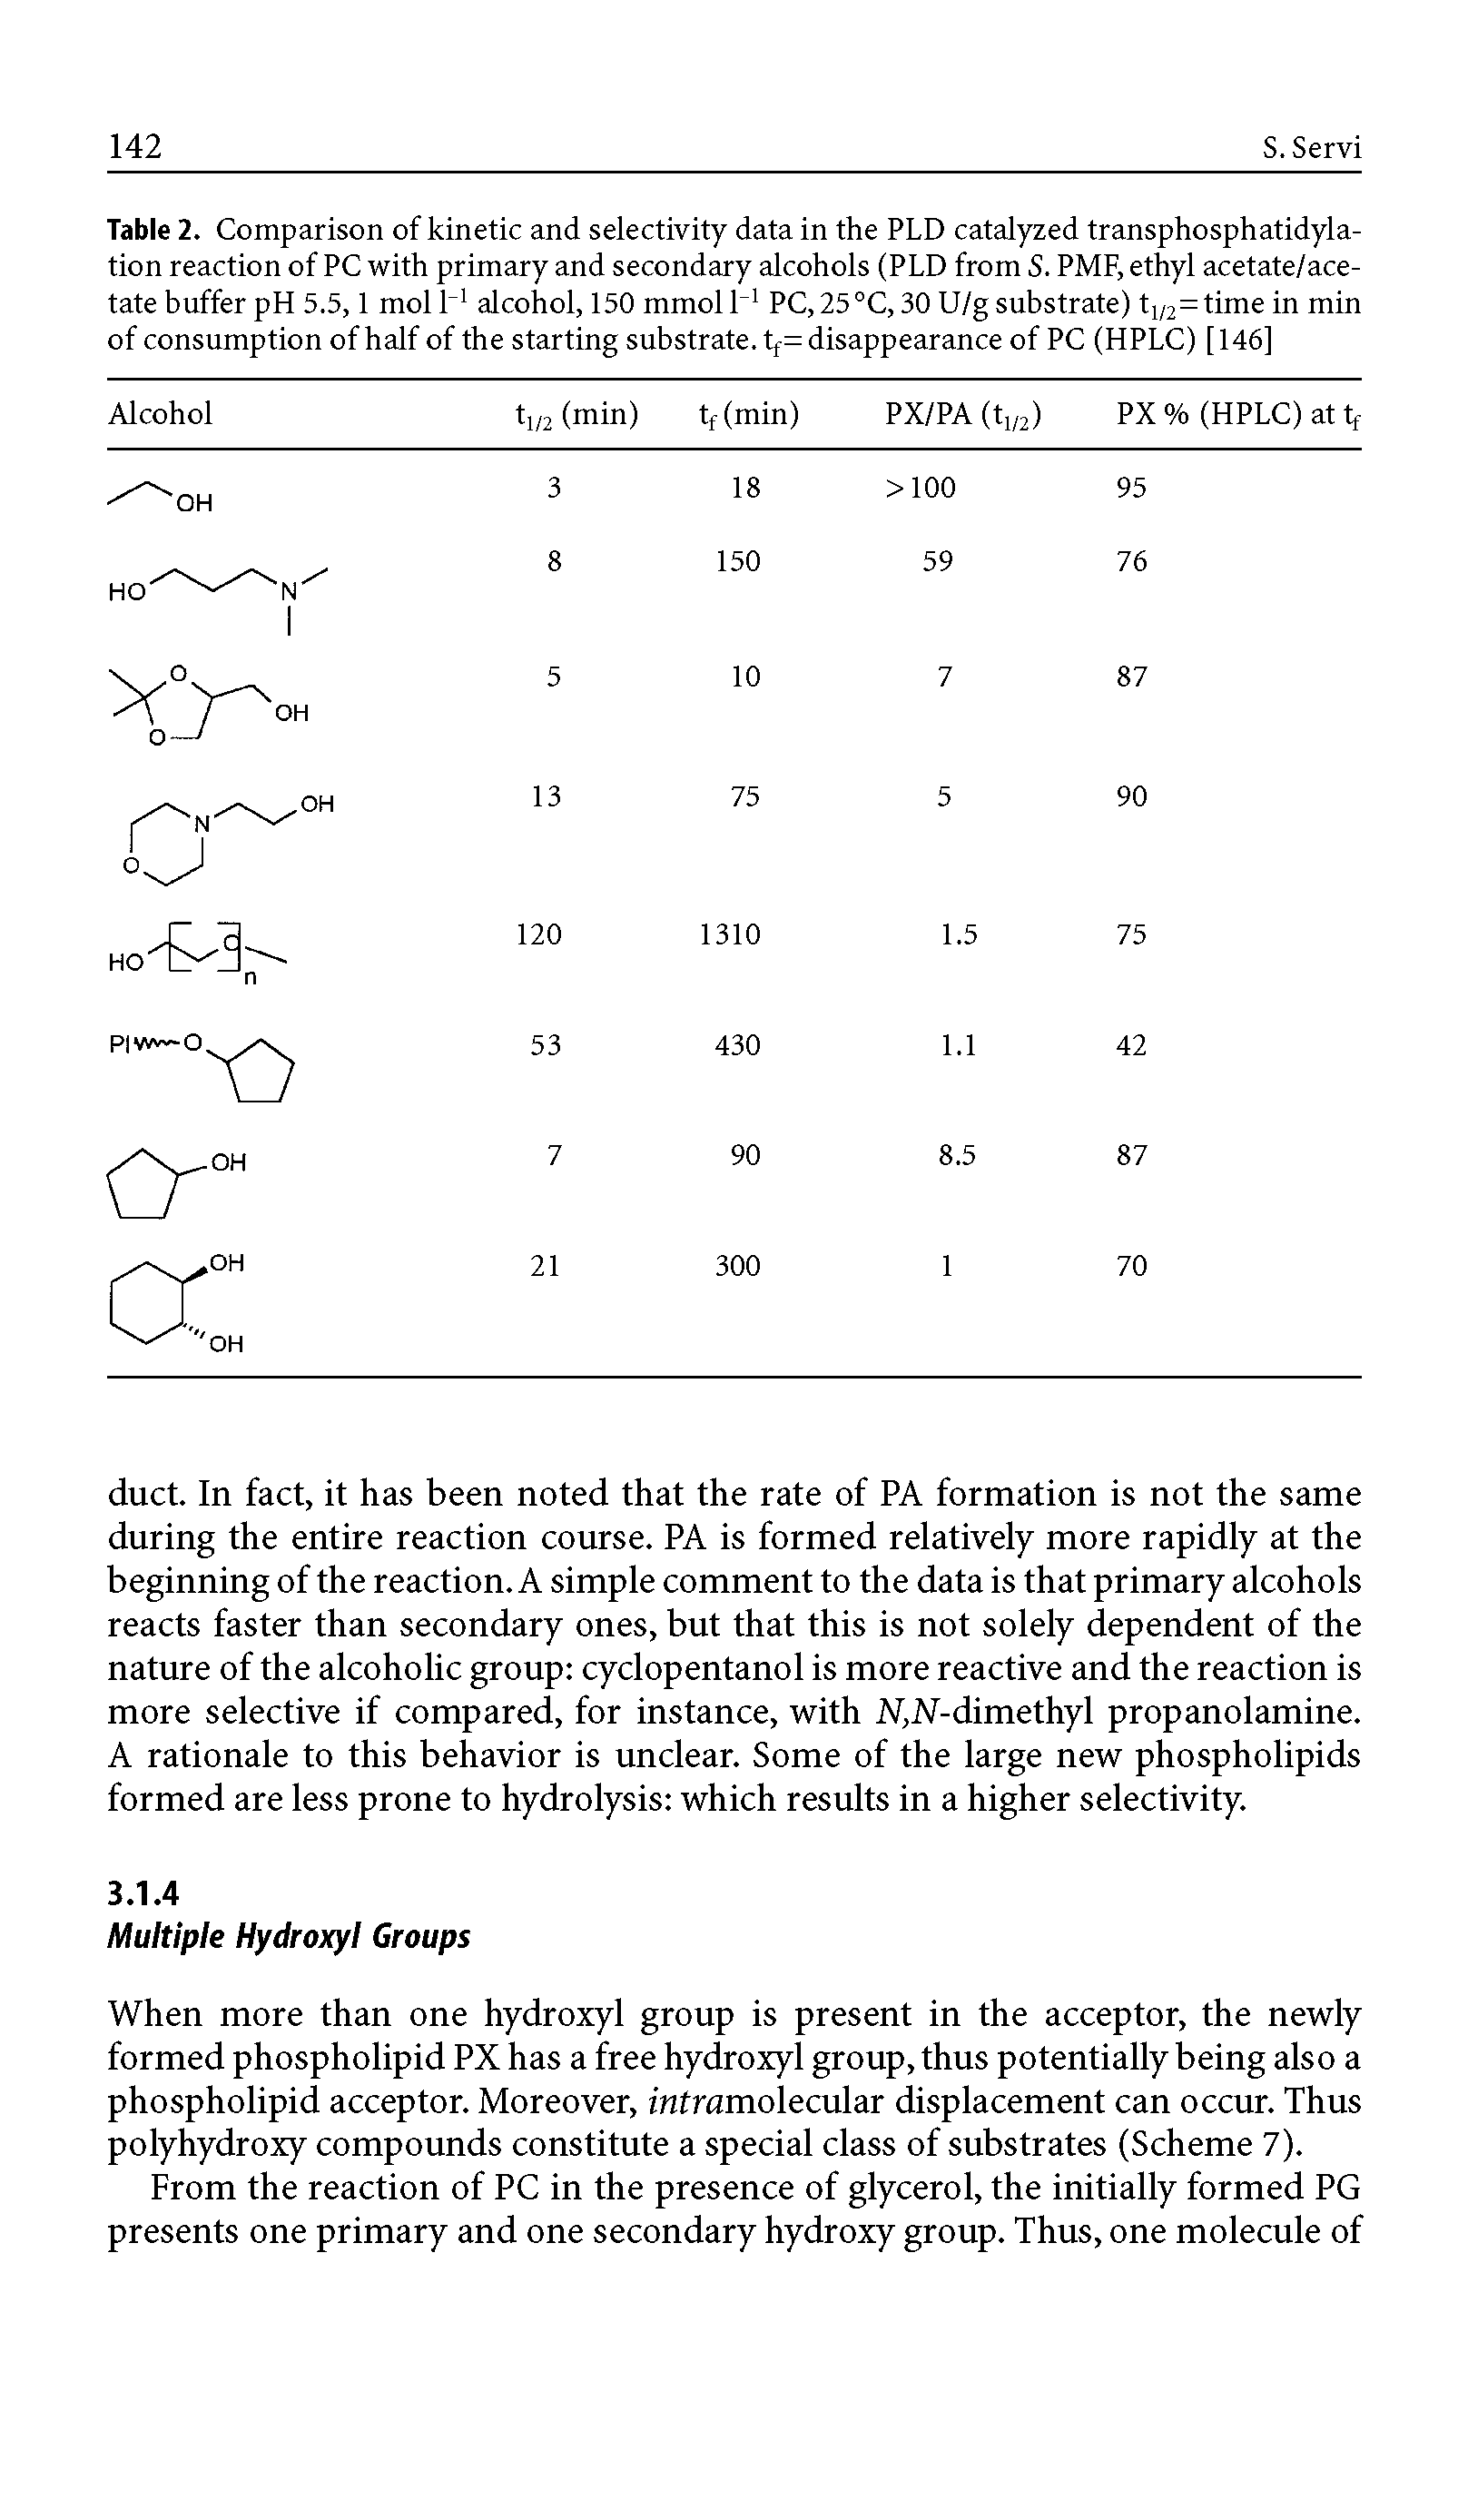 Table 2. Comparison of kinetic and selectivity data in the PLD catalyzed transphosphatidylation reaction of PC with primary and secondary alcohols (PLD from S. PMF, ethyl acetate/ace-tate buffer pH 5.5,1 mol L alcohol, 150 mmolL PC, 25 °C, 30 U/g substrate) t, . = time in min of consumption of half of the starting substrate. tf= disappearance of PC (HPLC) [146] ...